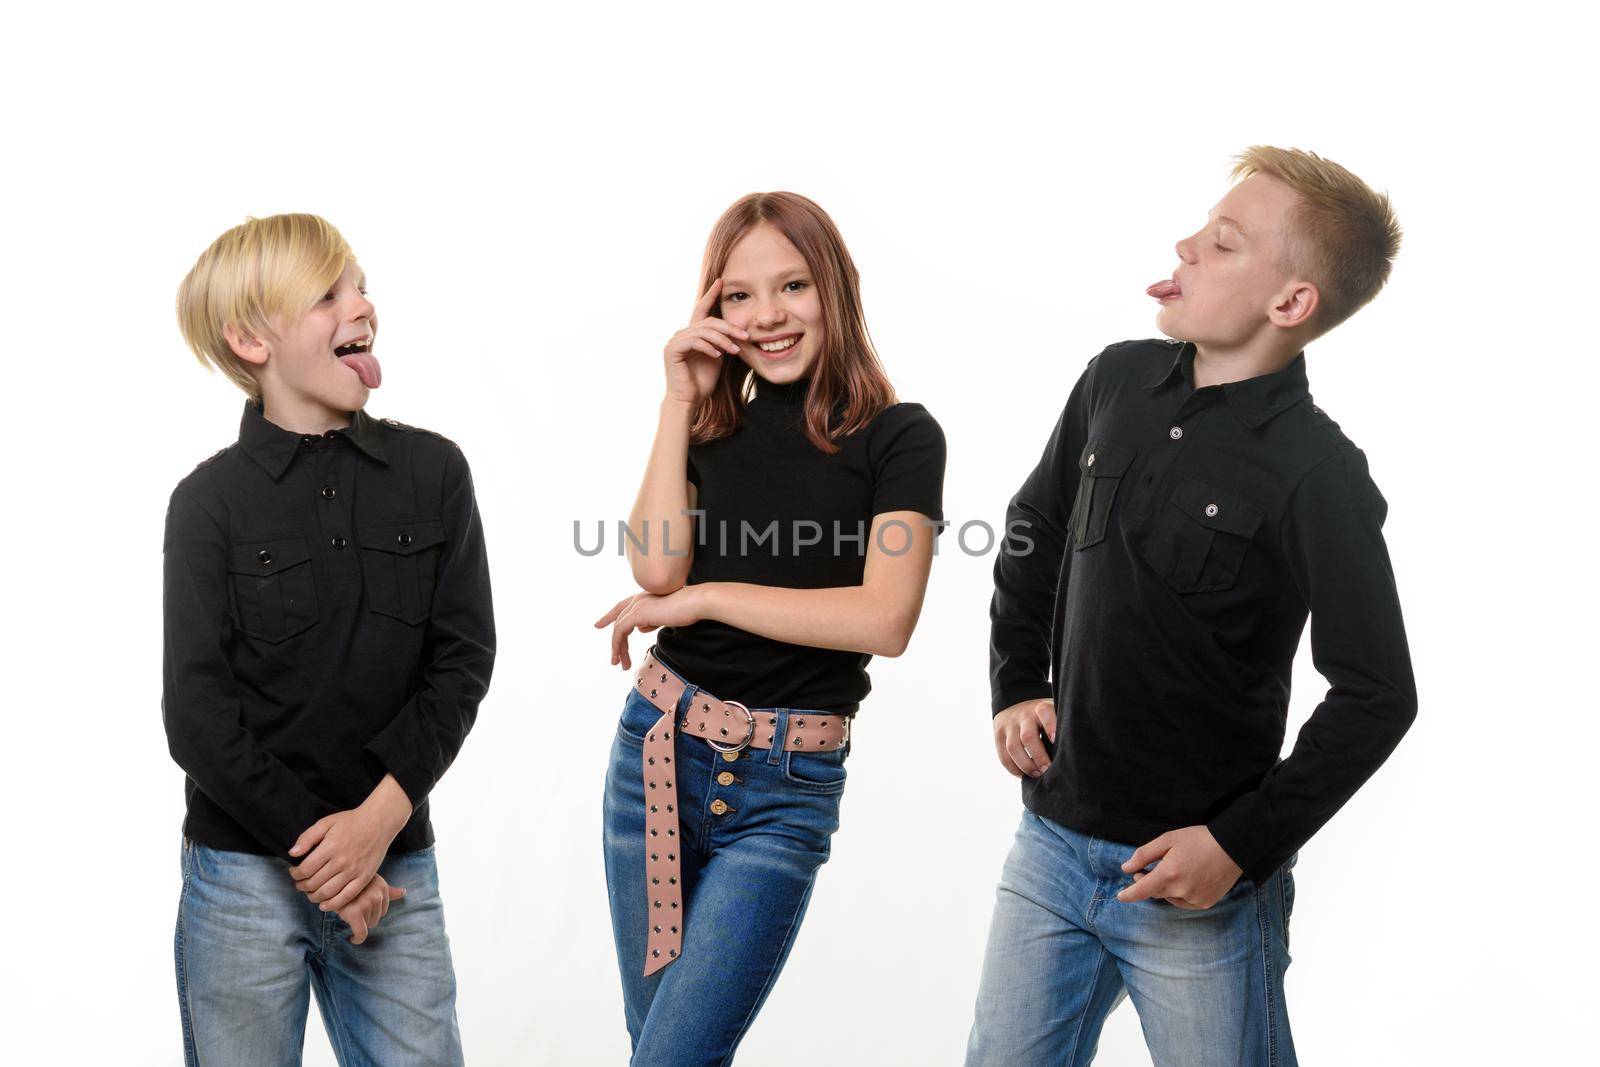 Happy girl surrounded by boring brothers, brothers show tongue to sister